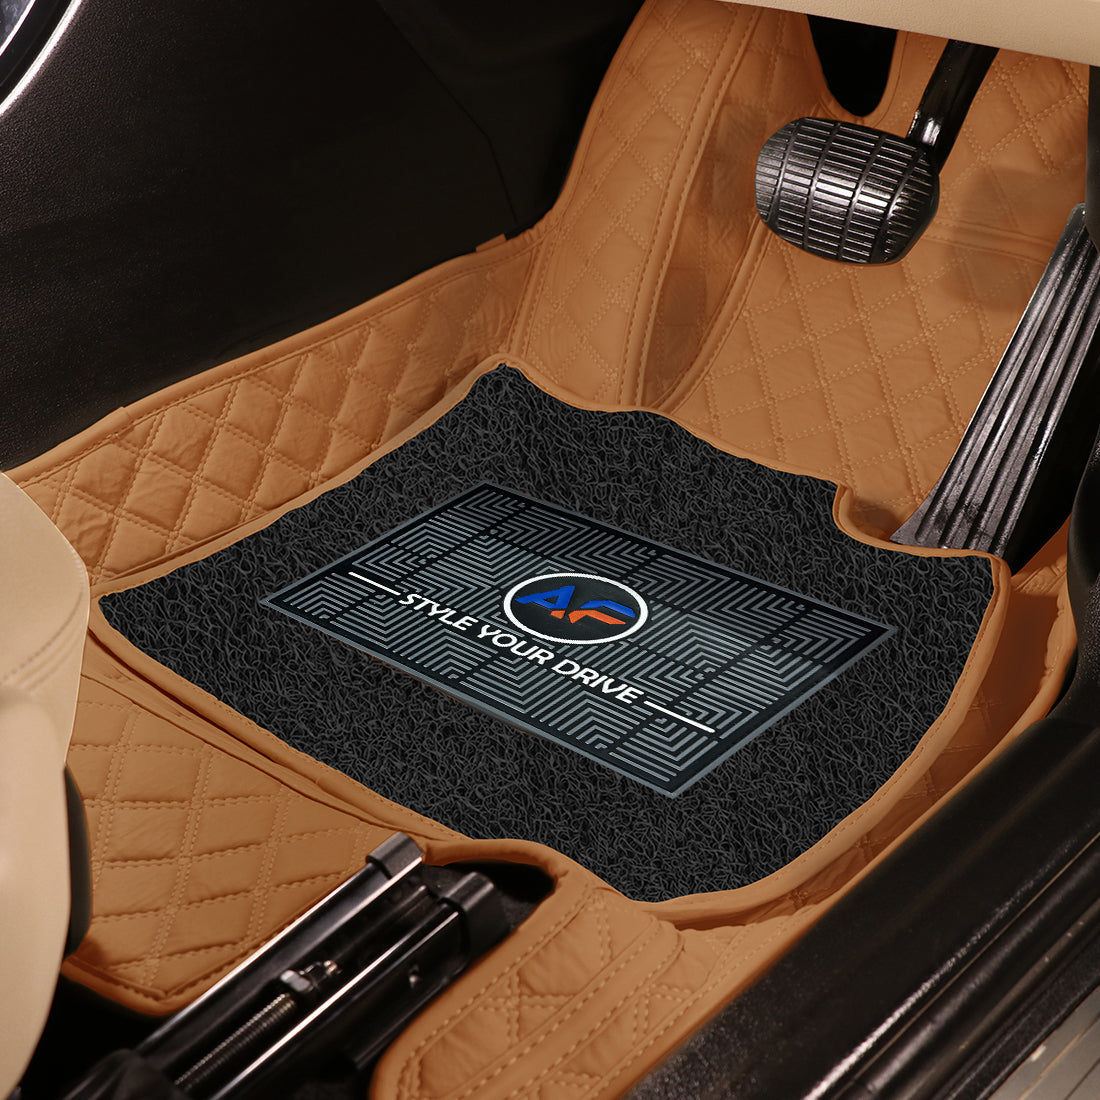 Mercedes E-Class 2022-7D Luxury Car Mat, All Weather Proof, Anti-Skid, 100% Waterproof & Odorless with Unique Diamond Fish Design (24mm Luxury PU Leather, 2 Rows)